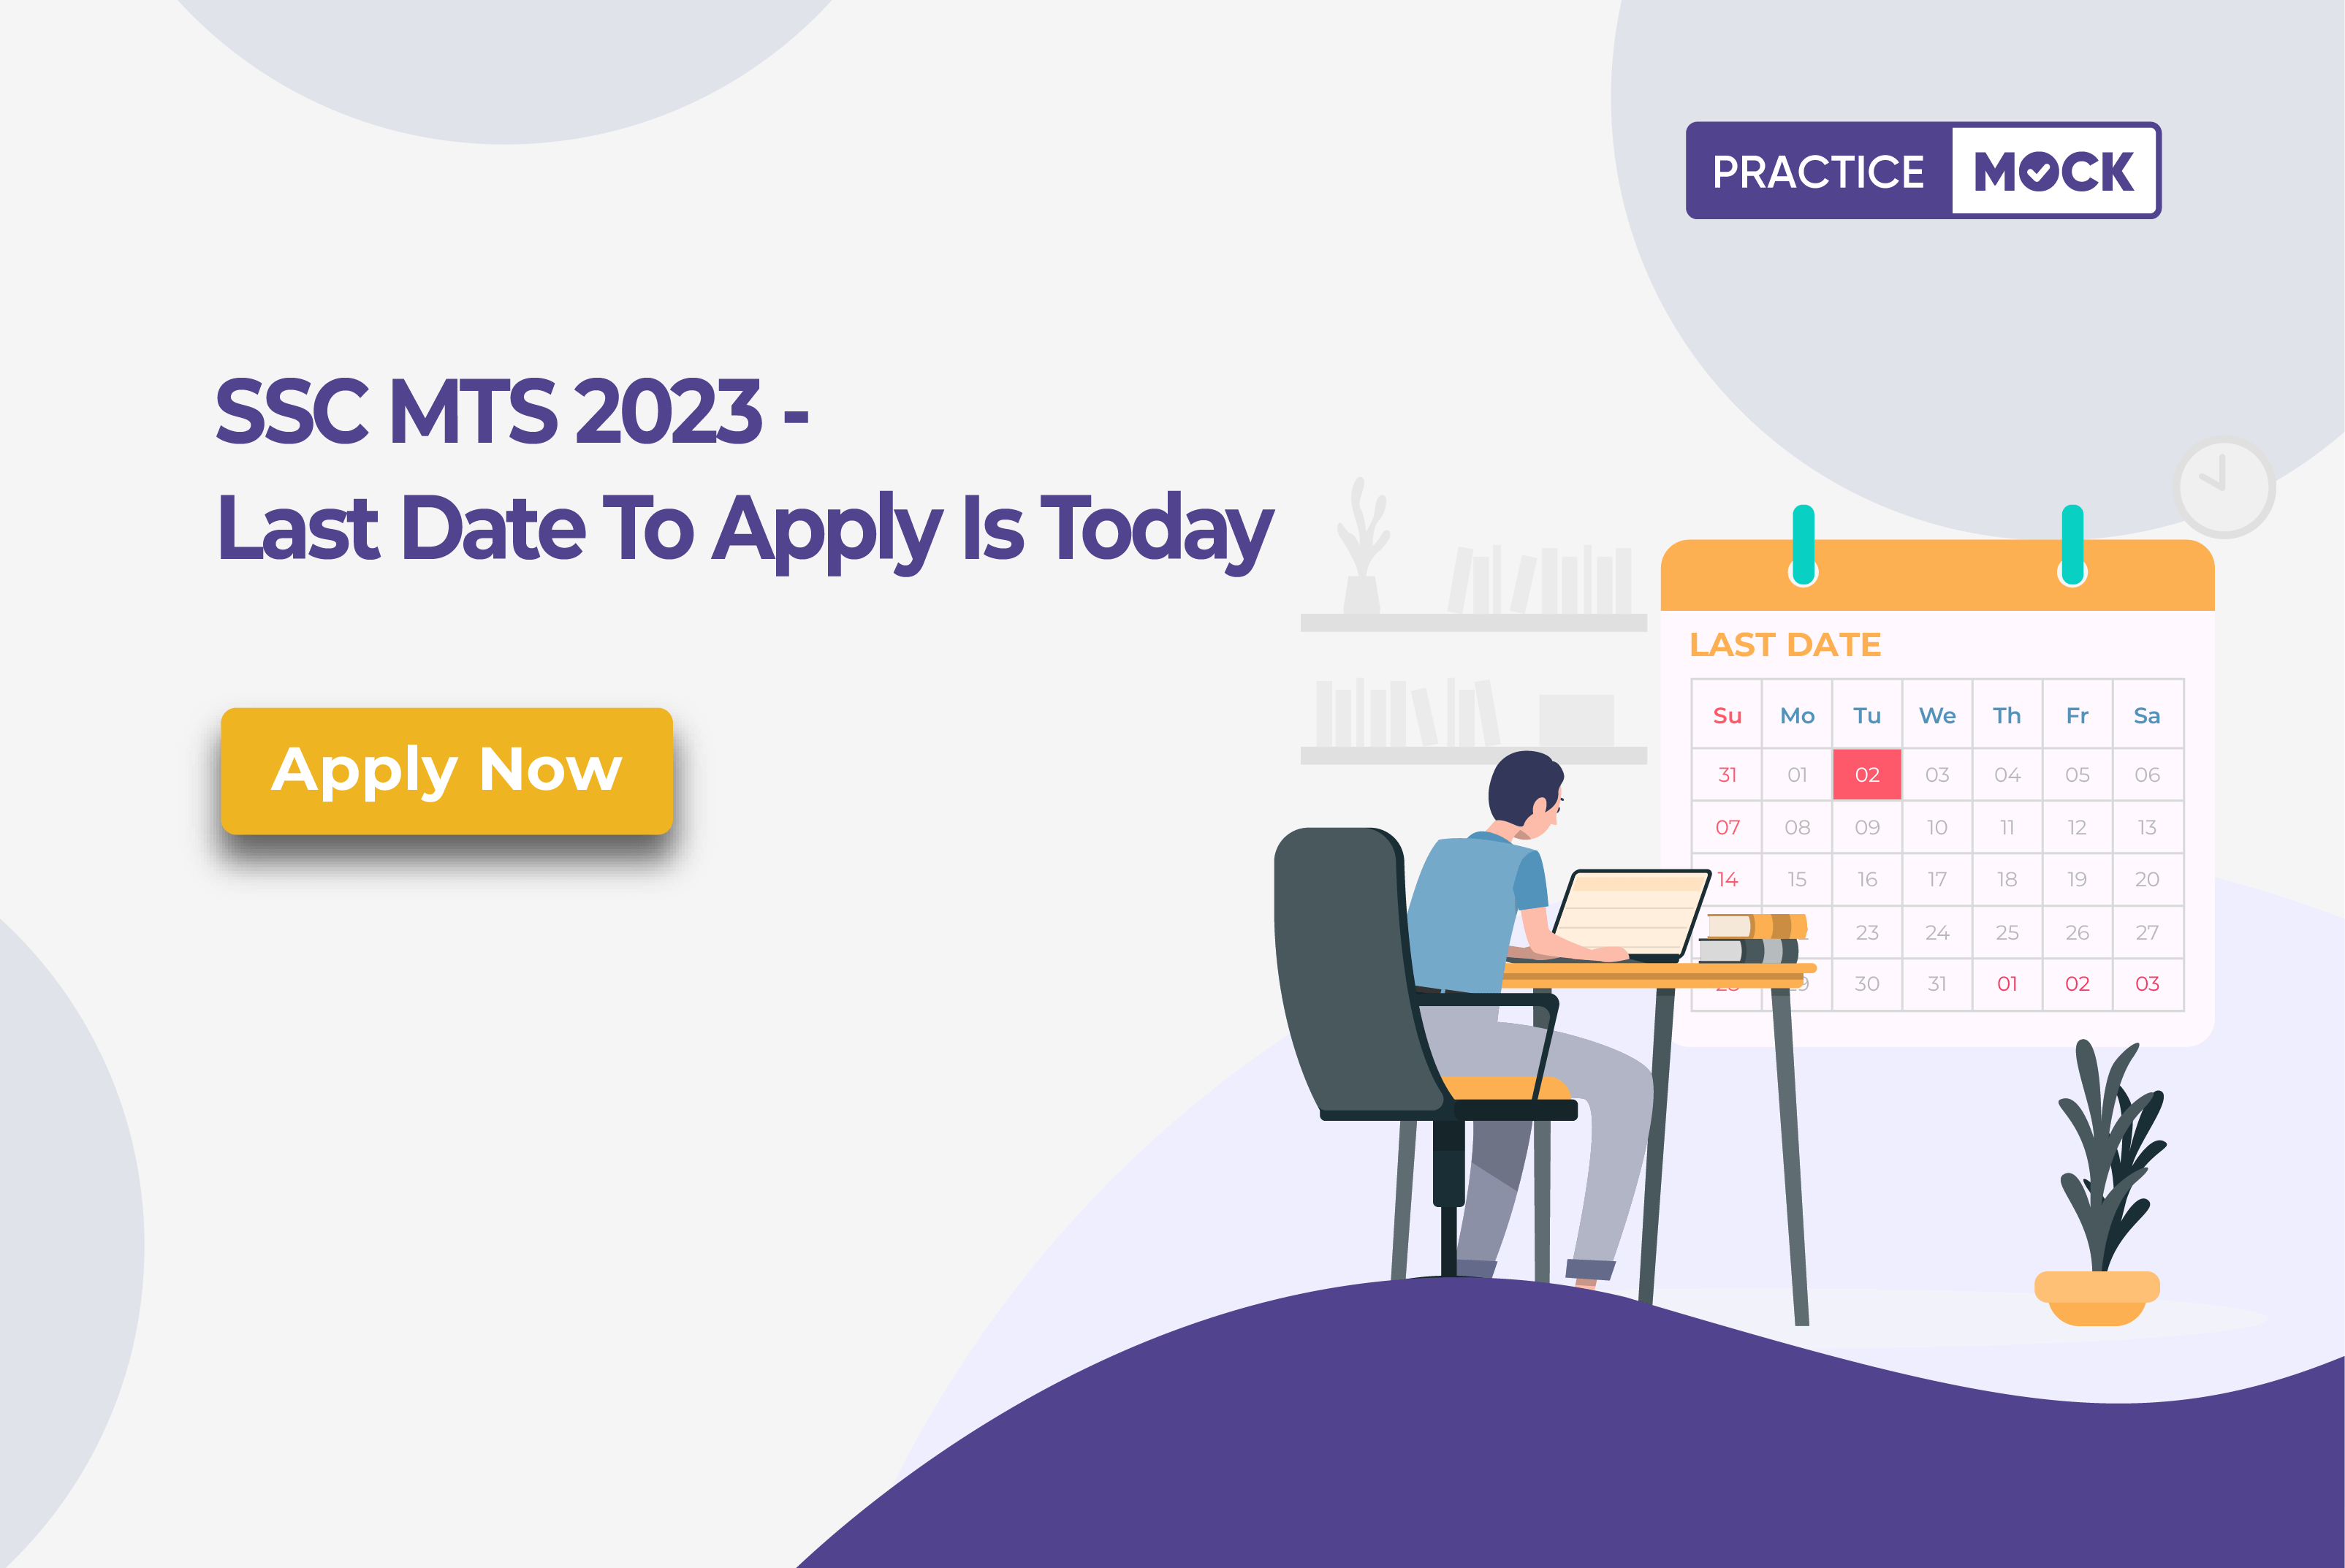 SSC MTS Last Date to Apply is Today